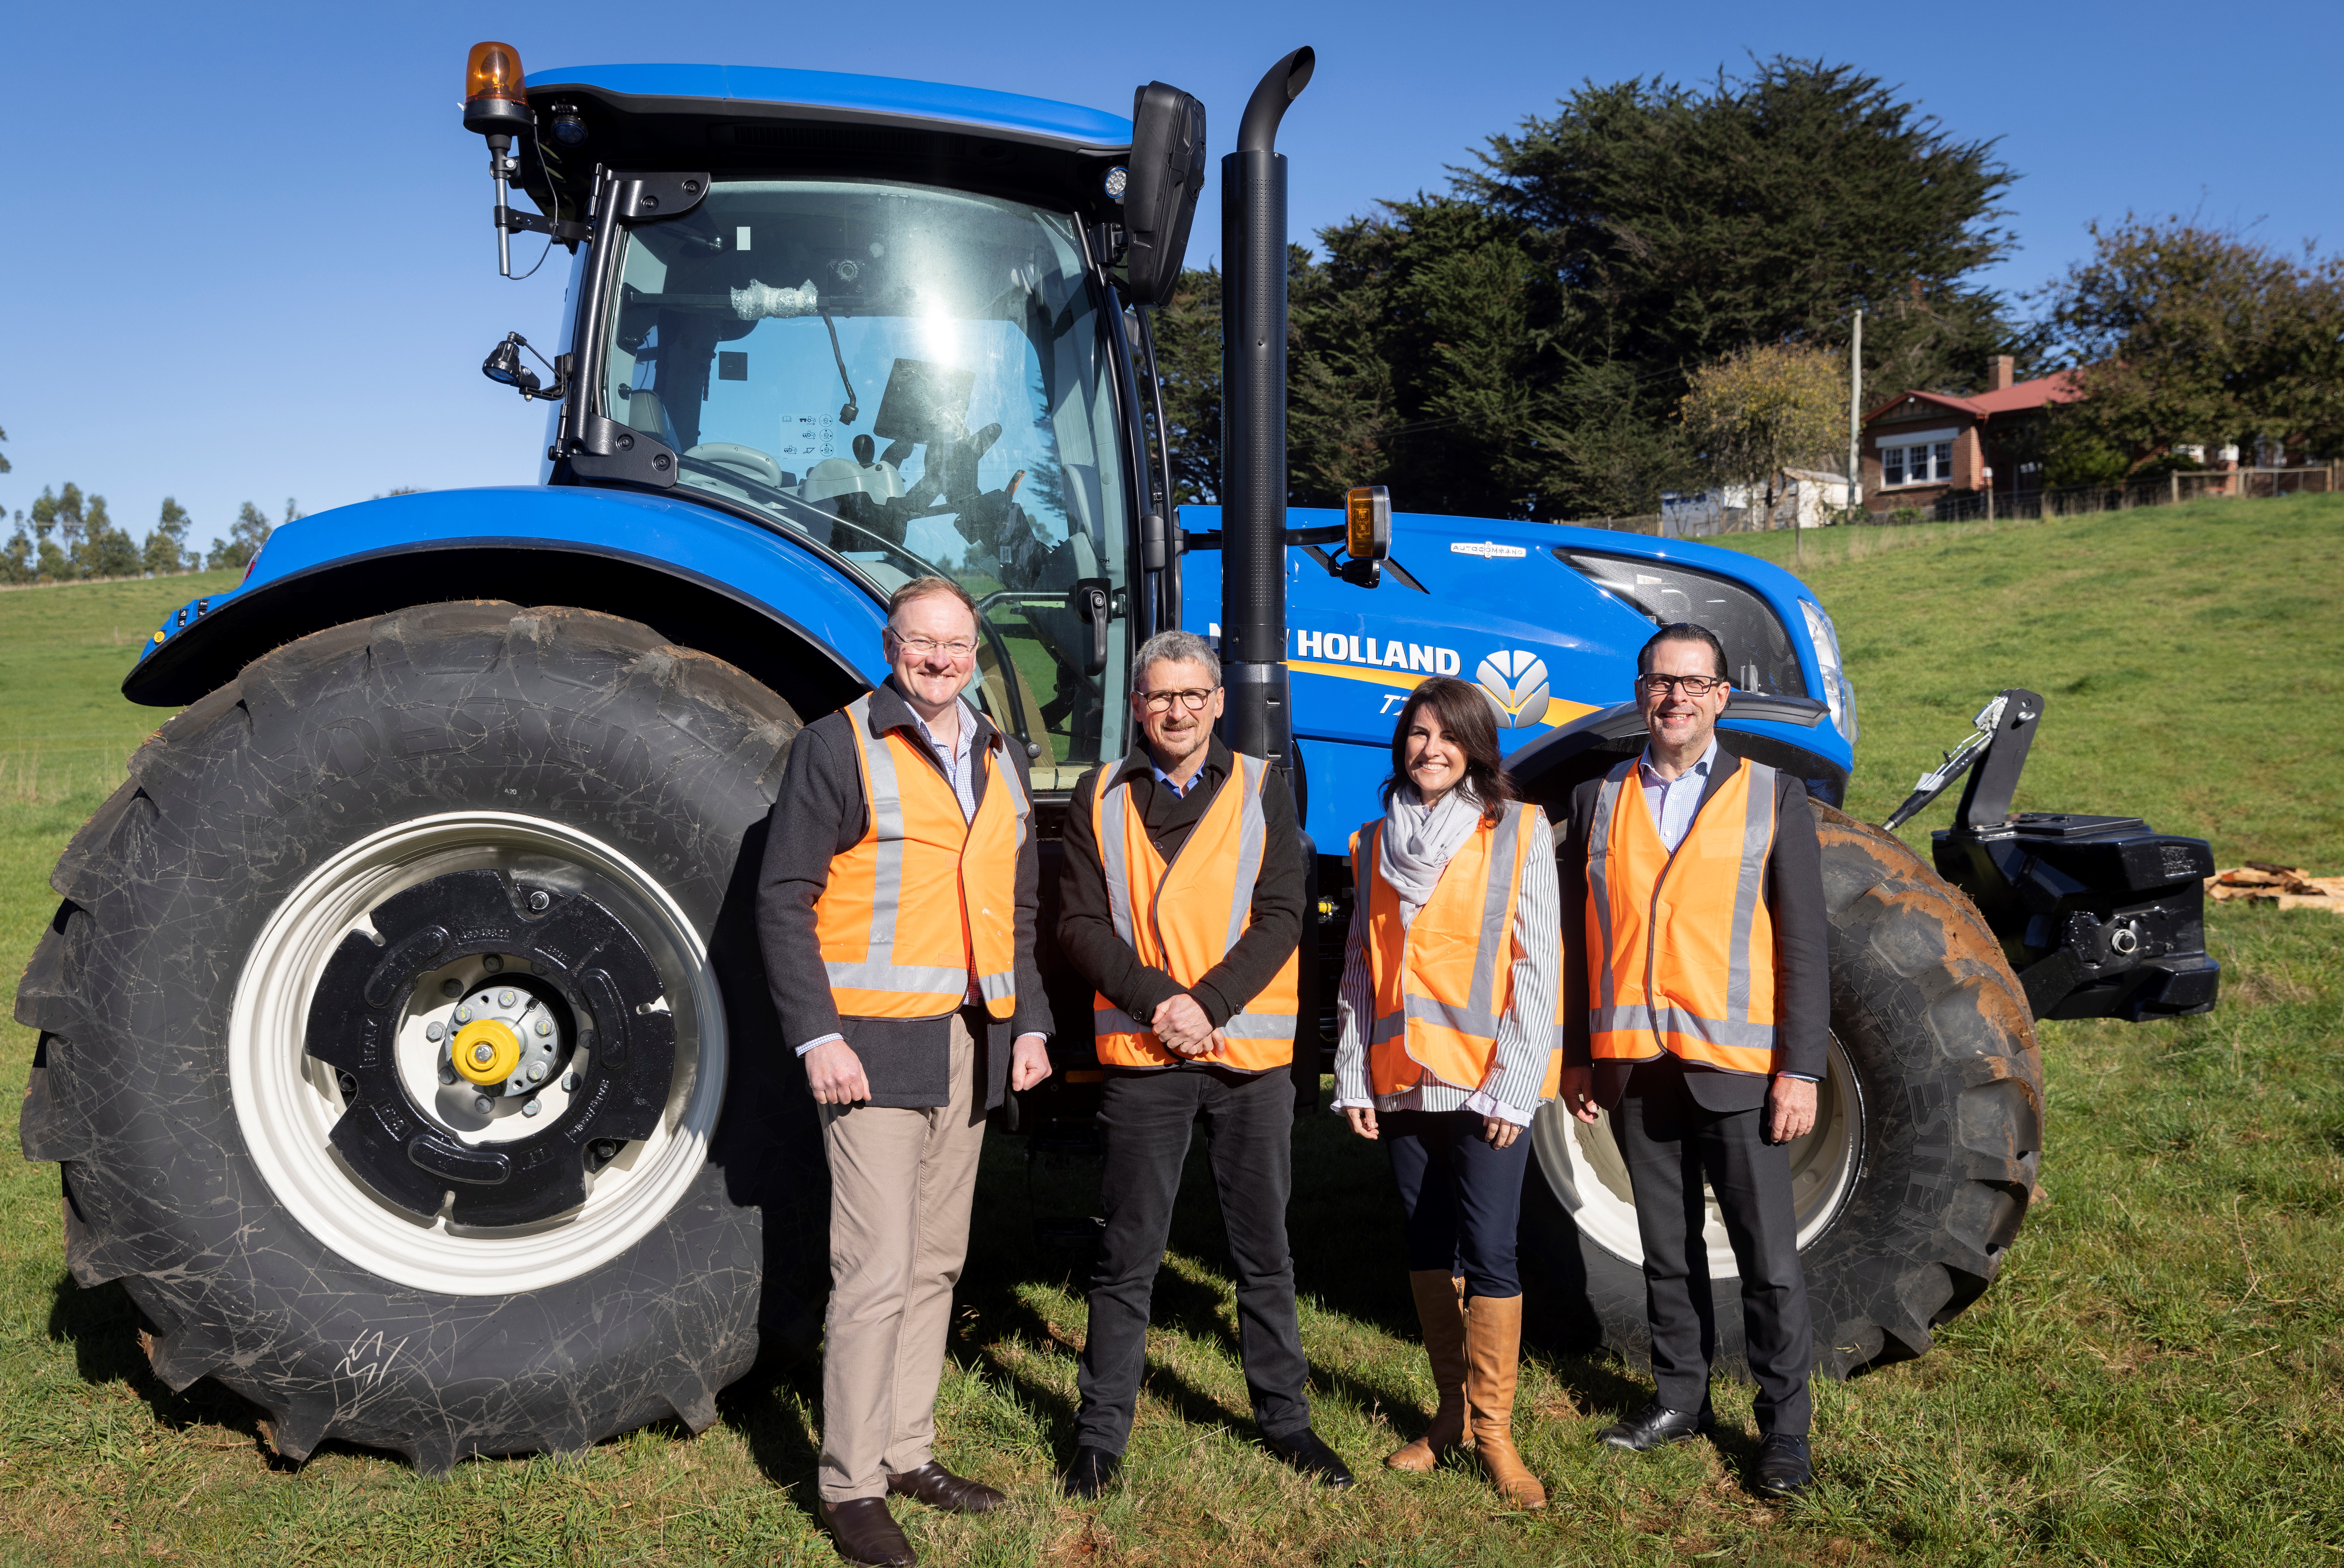 TasTAFE CEO Grant Dreher, minister Jo Palmer, Minister Roger Jaensch and pose for a photo in front of a large blue tractor at TasTAFE's Freer Farm site